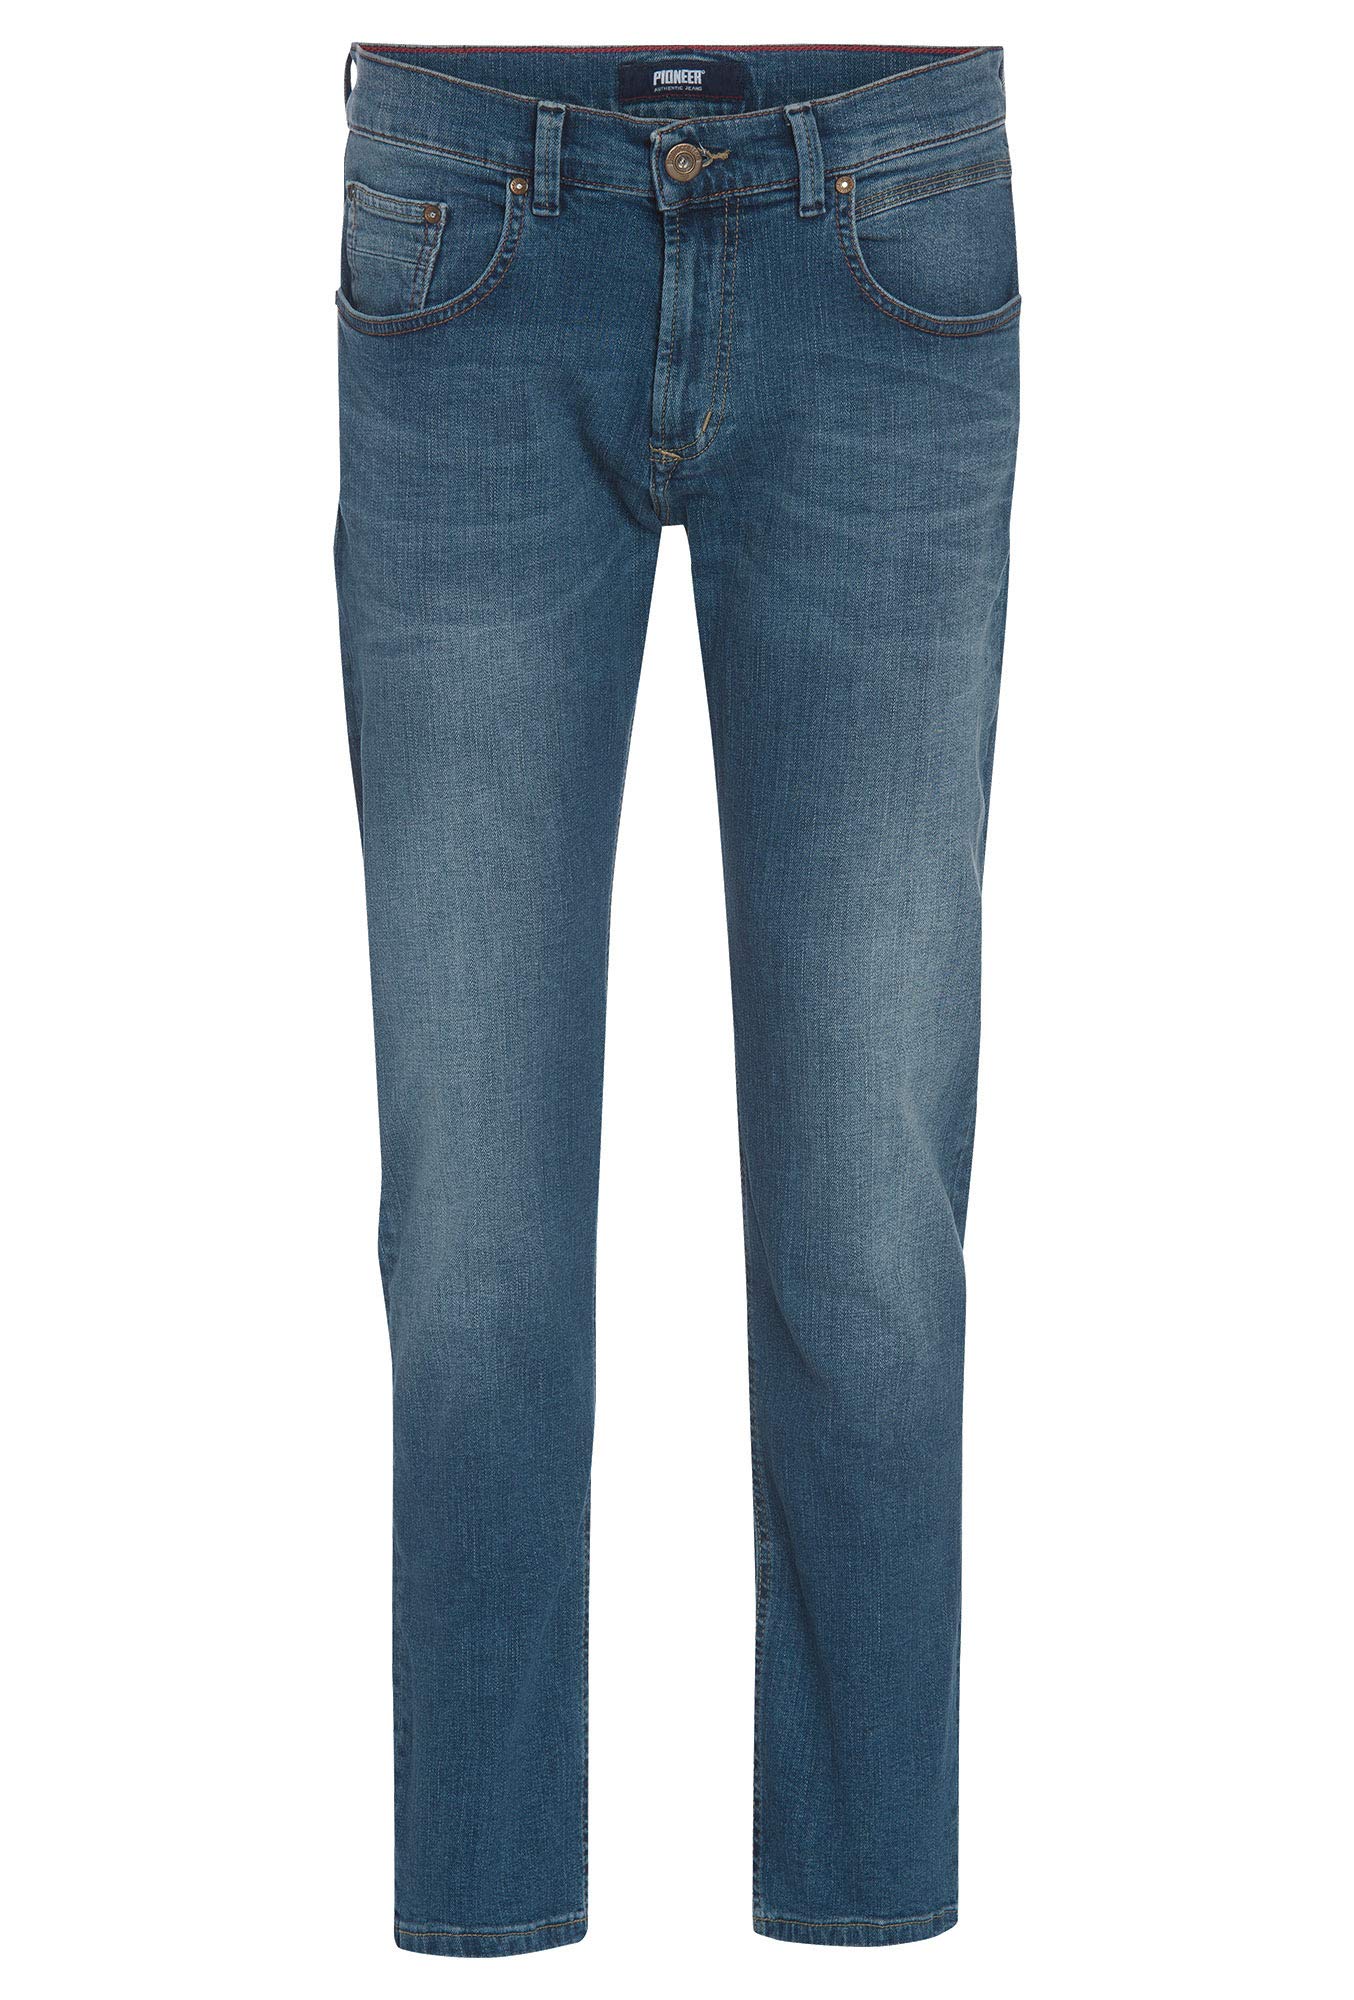 Pioneer Herren River Straight Jeans, Blau (Stone Used with Buffies 346), 38W / 34L